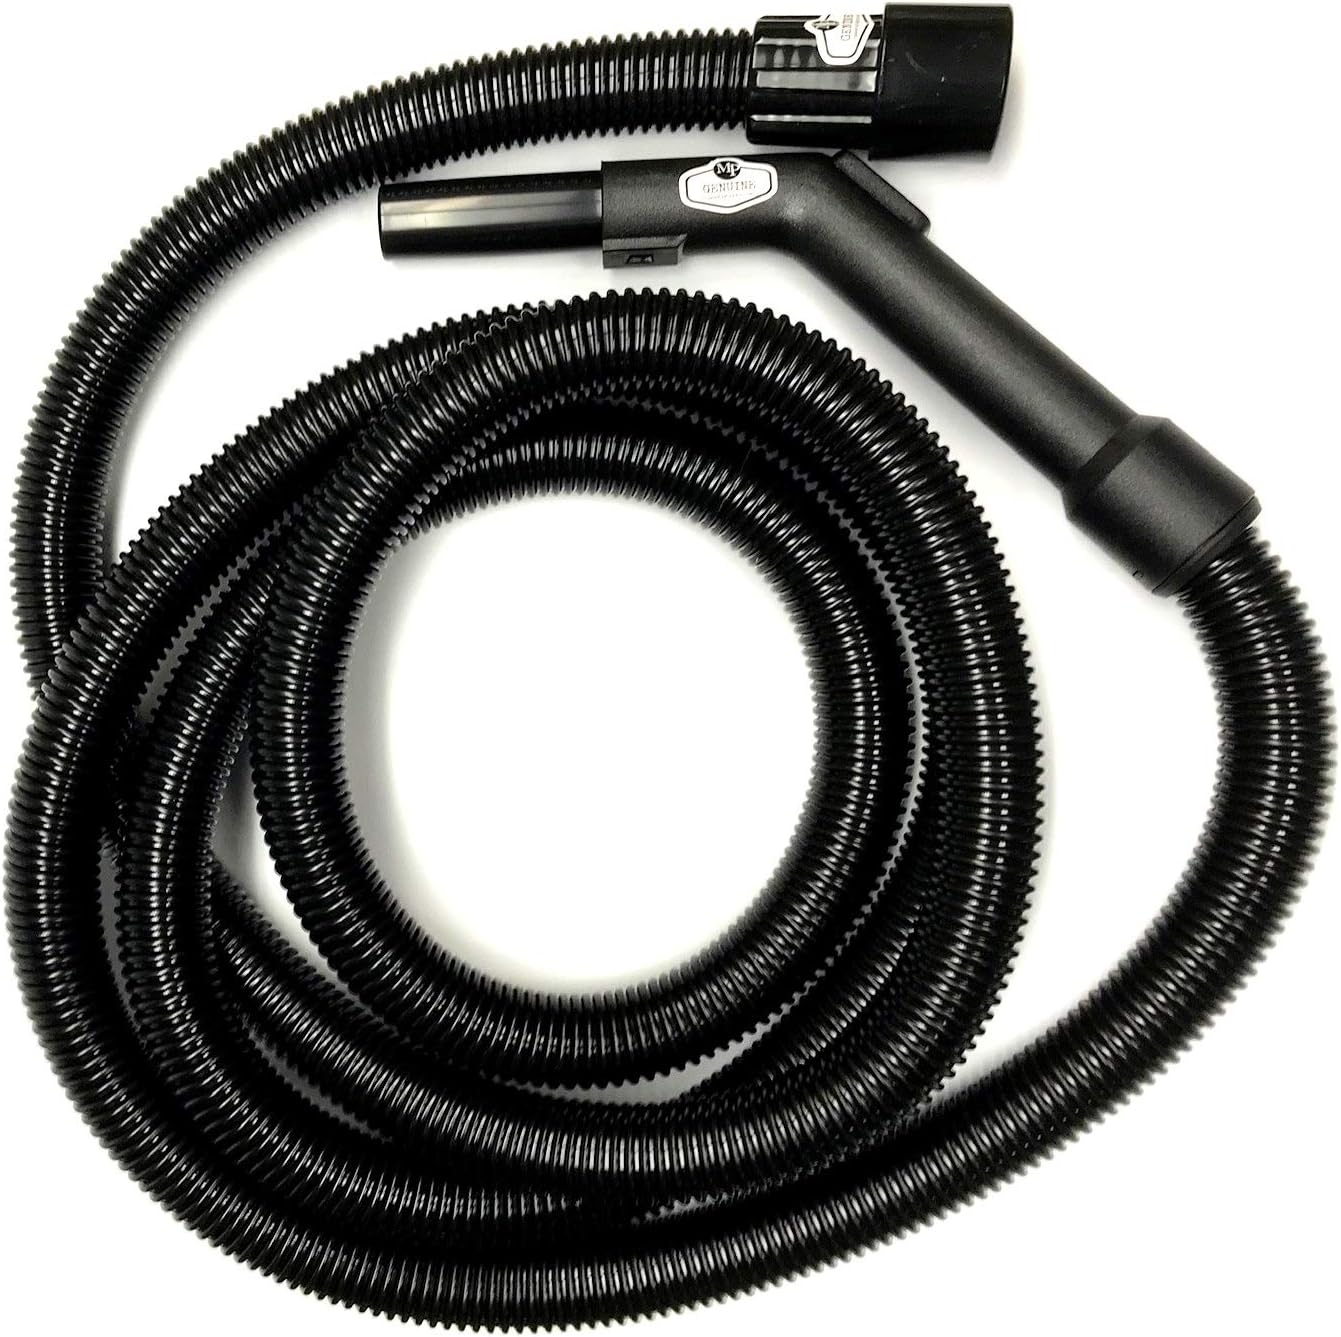 Compatible Replacement for Shop VAC and Ridgid Style Wet Dry Vacuum Cleaner Crushproof Industrial Commercial Grade Extension Hose with Air Suction